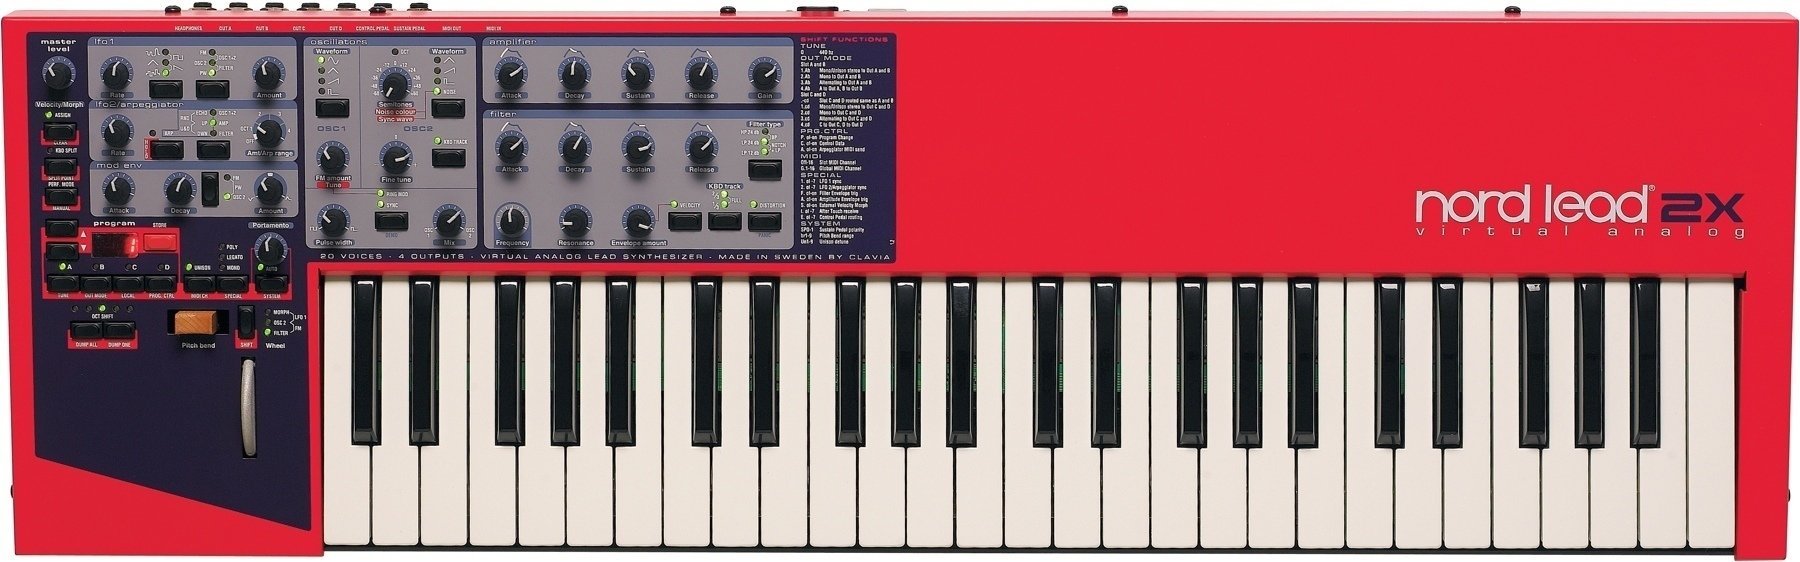 Synthesizer NORD Lead 2X